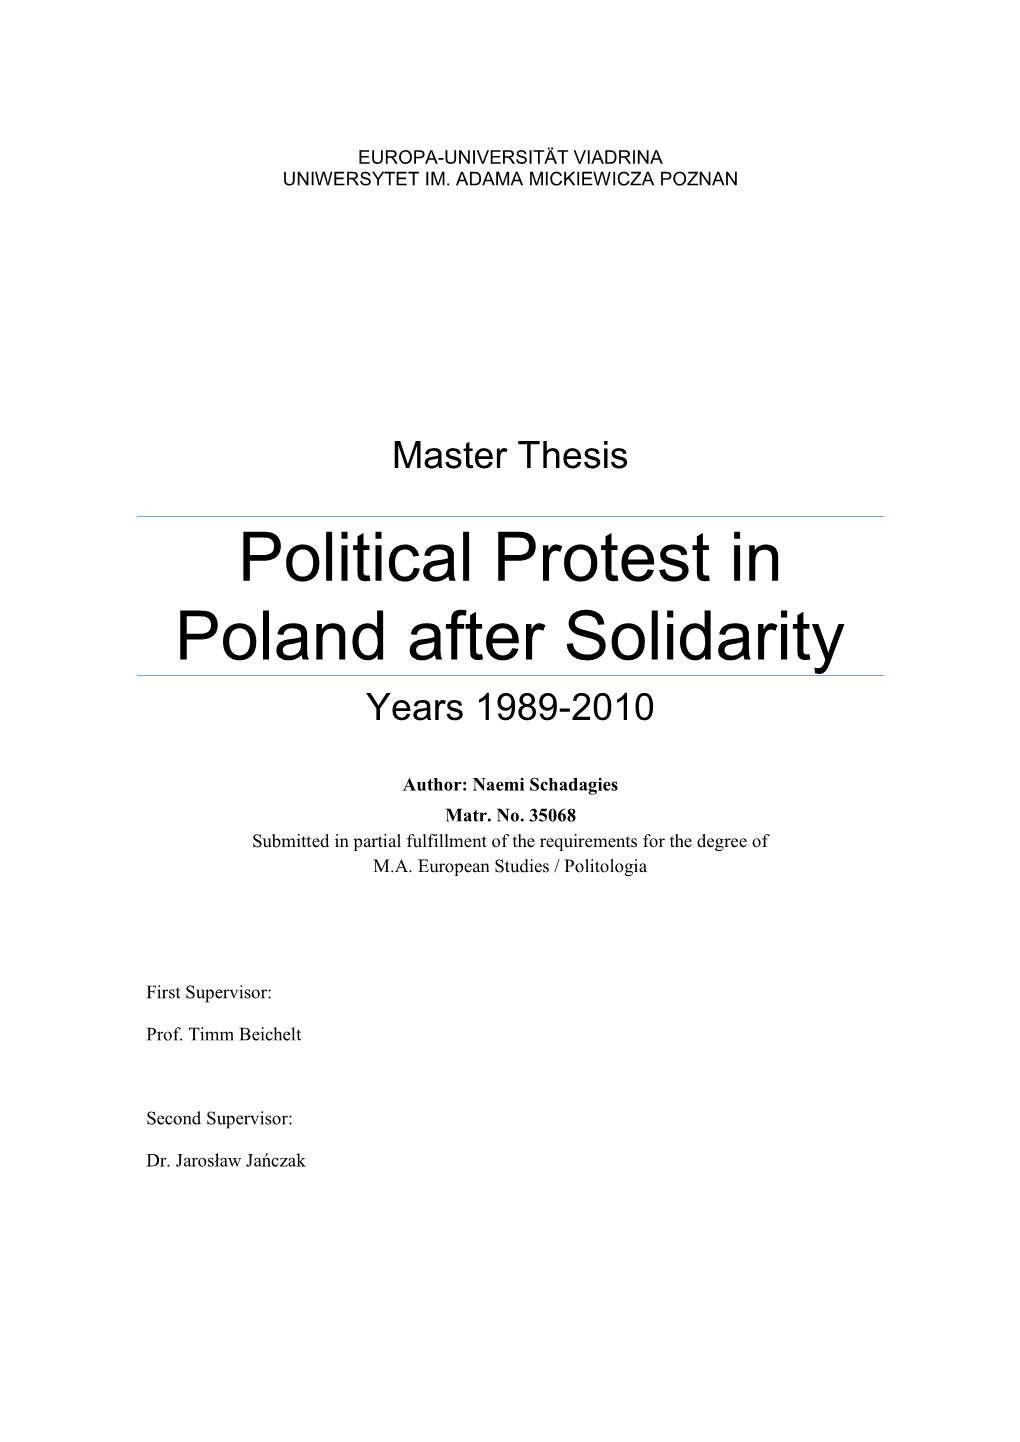 Political Protest in Poland After Solidarity Years 1989-2010